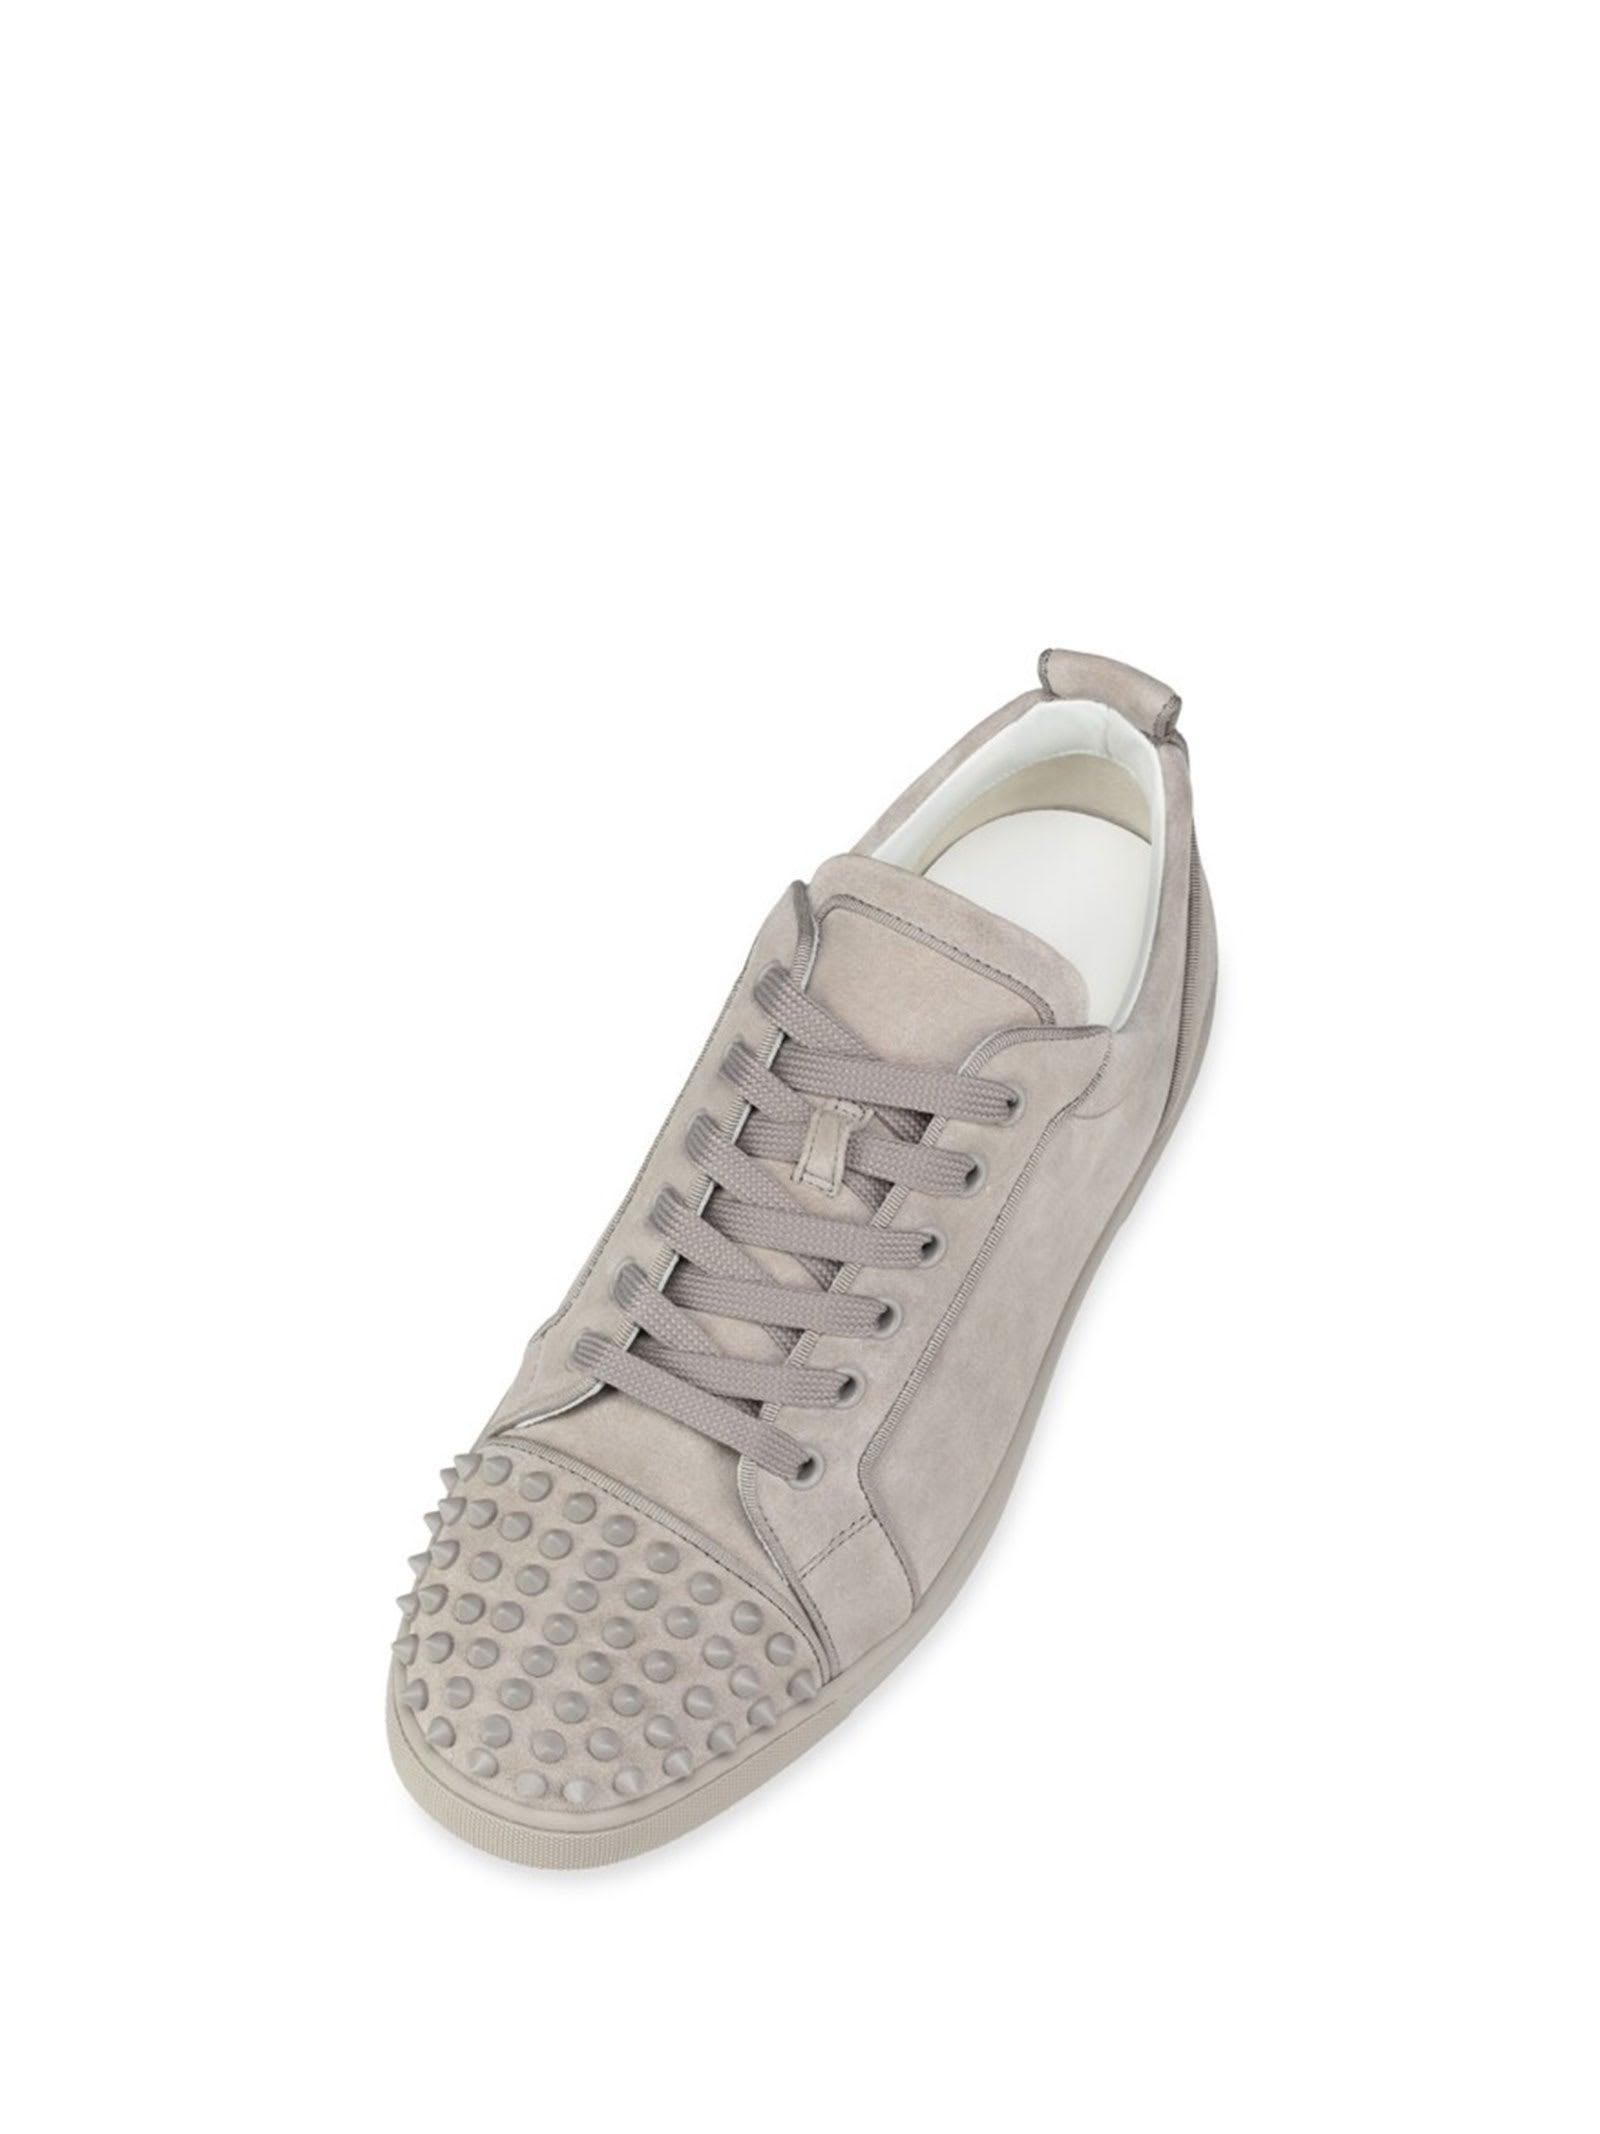 Christian Louboutin Lou Spike White And Blue Sneakers New Size 45 US 12